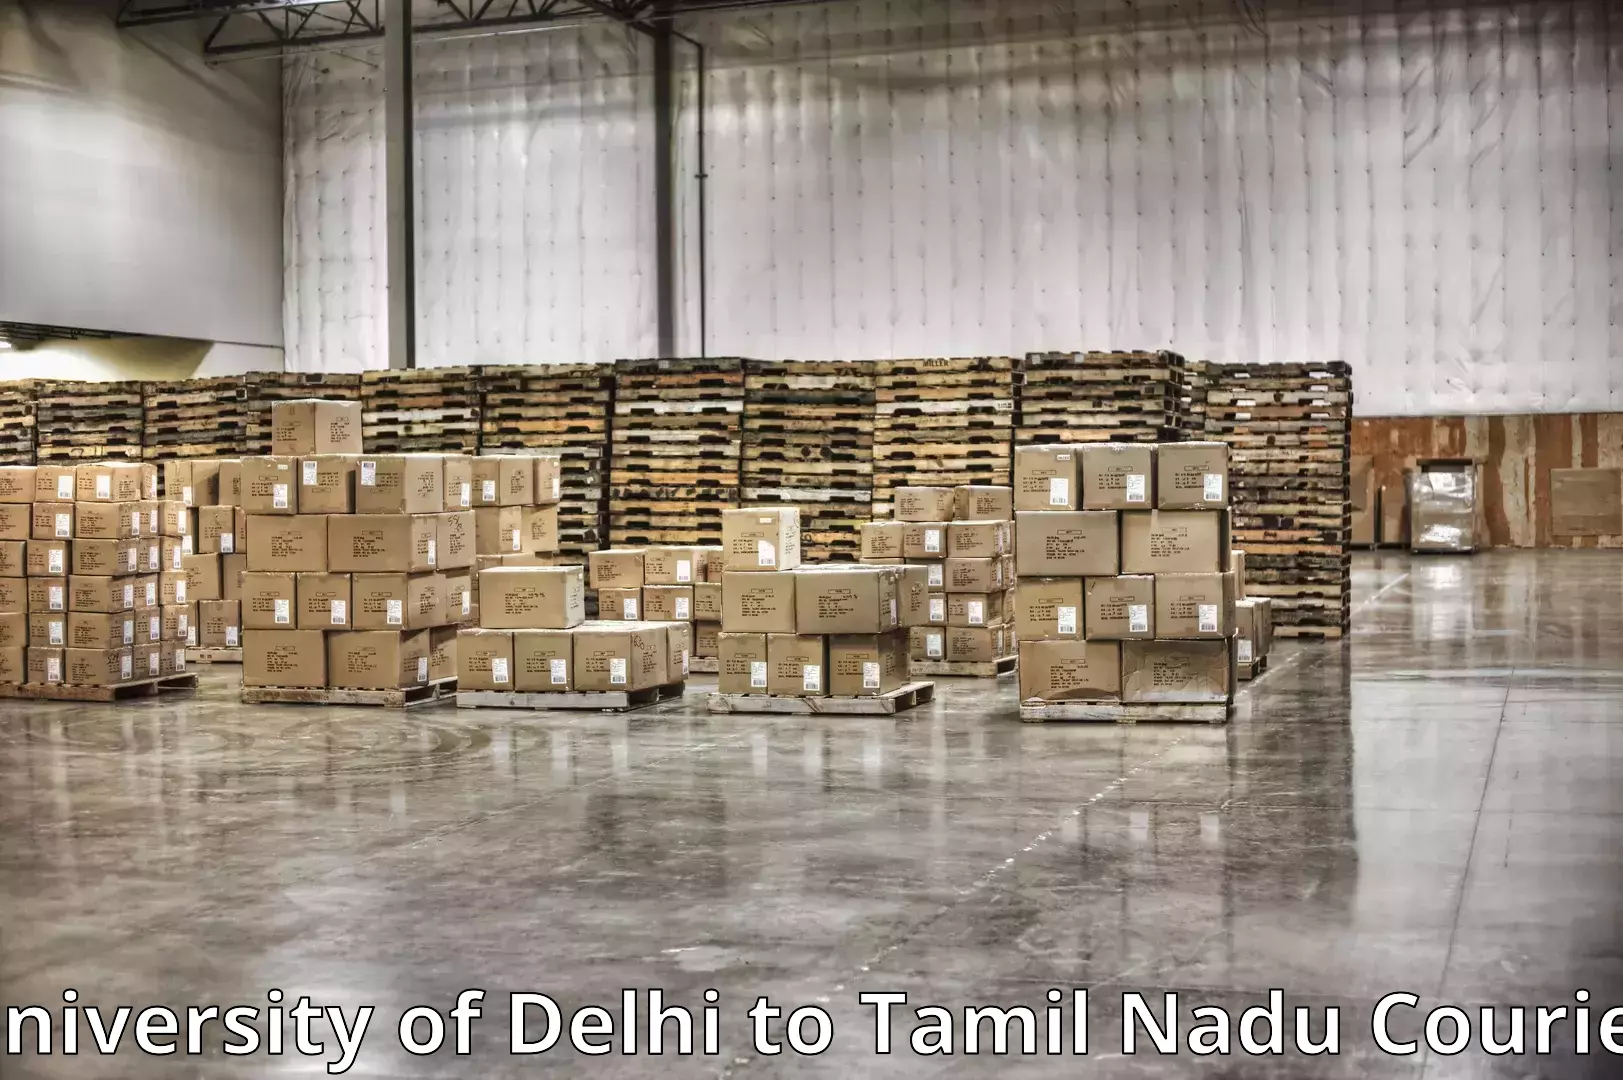 Trusted furniture movers University of Delhi to Shanmugha Arts Science Technology and Research Academy Thanjavur